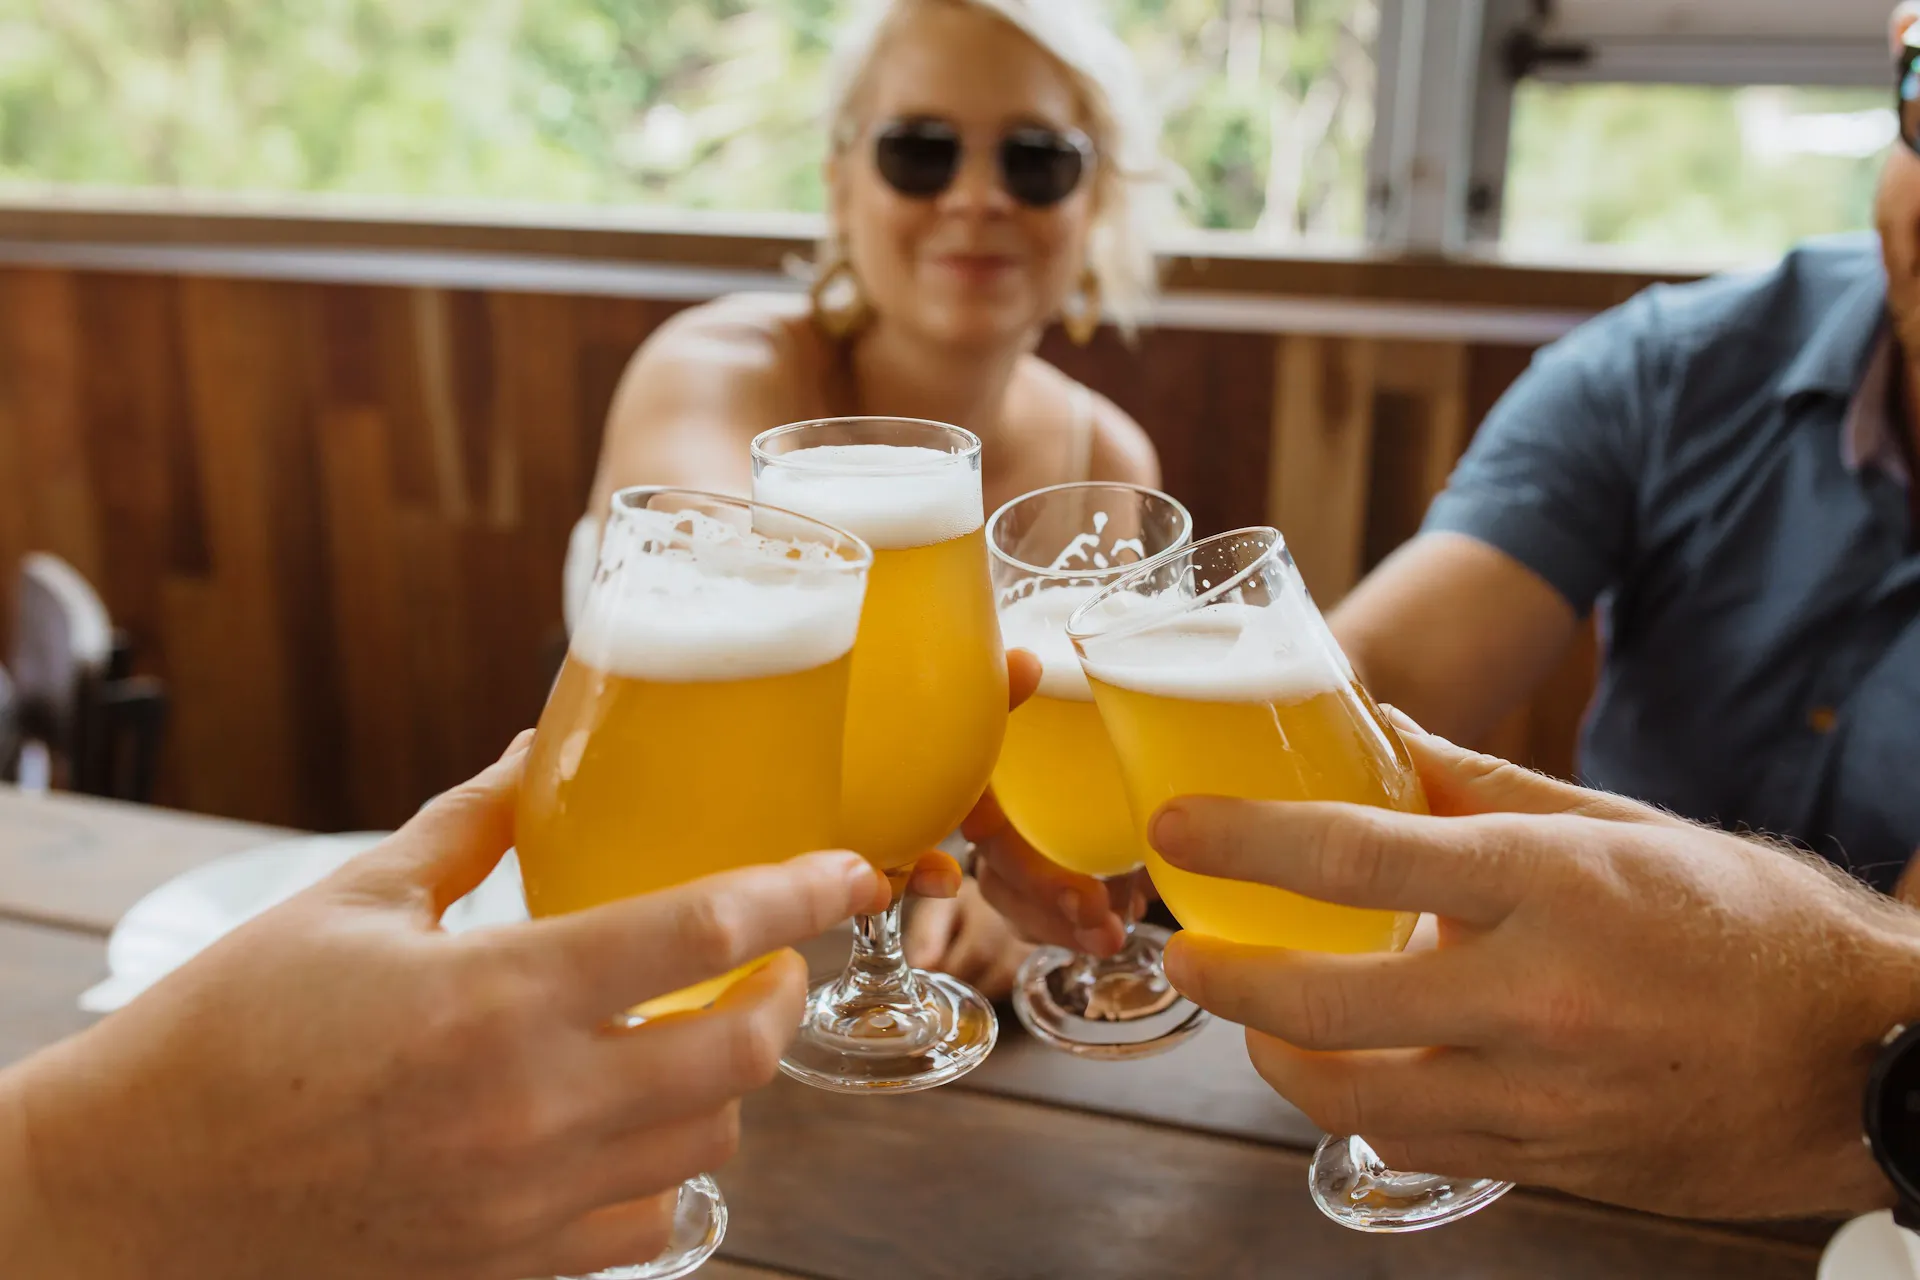 Bring a third wheel and save 30% off a brewery tour!